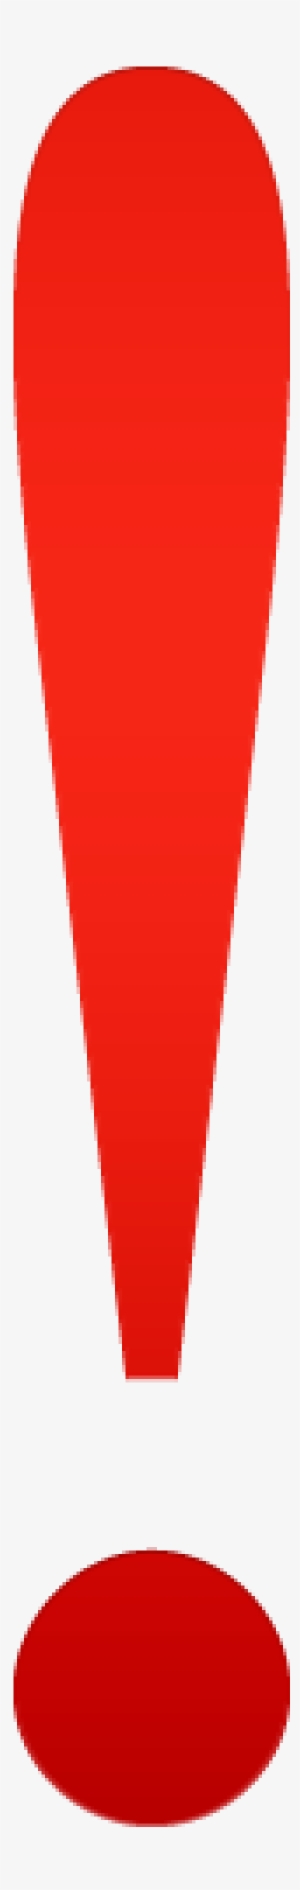 Red Exclamation Point Png - Graphic Exclamation Point